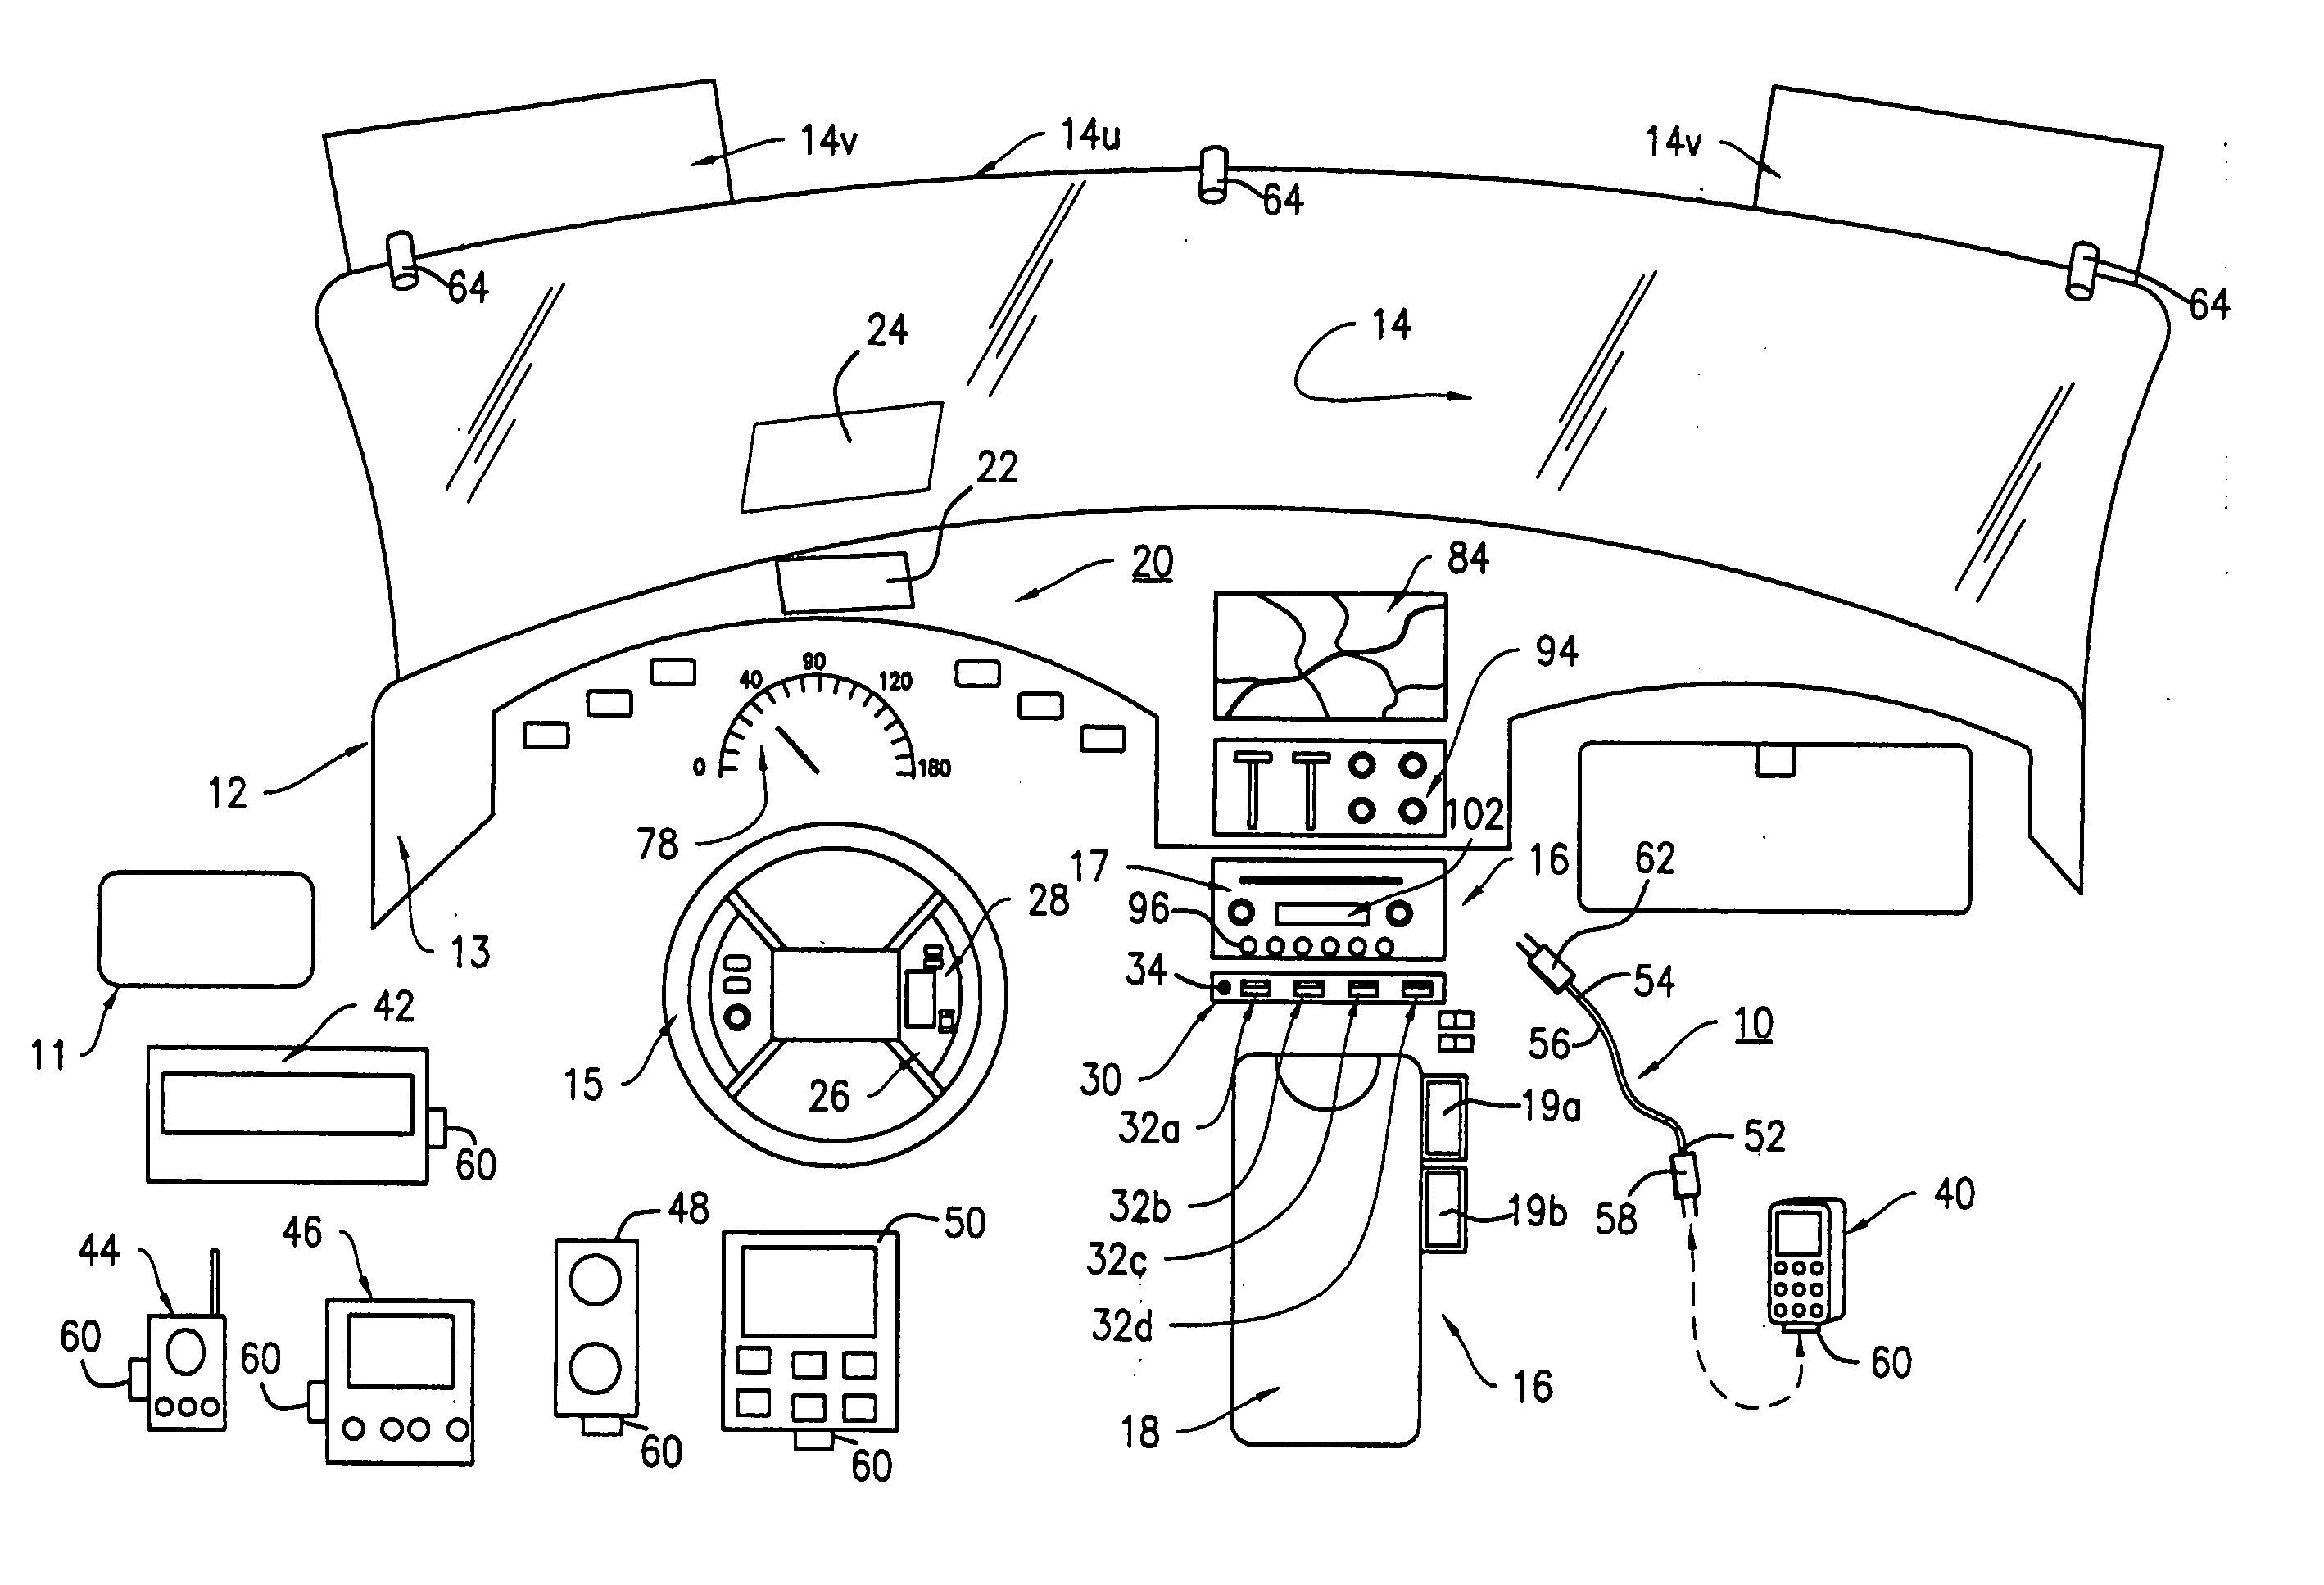 Portable adaptor and software for use with a heads-up display unit